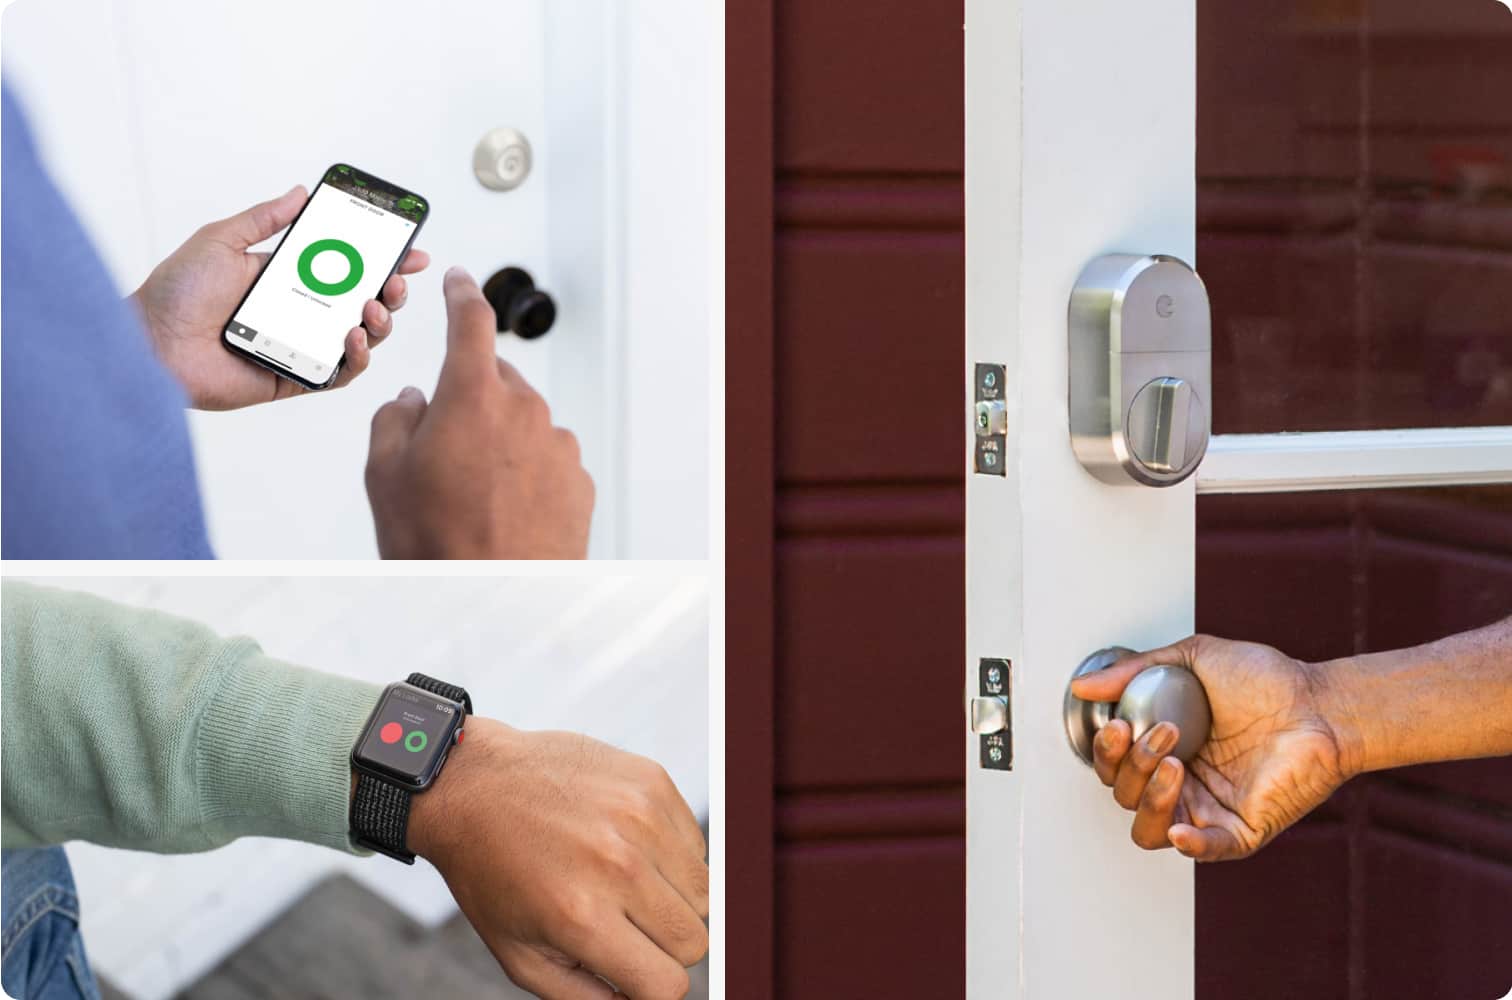 Different people showing the different methods for unlocking your August smart lock 